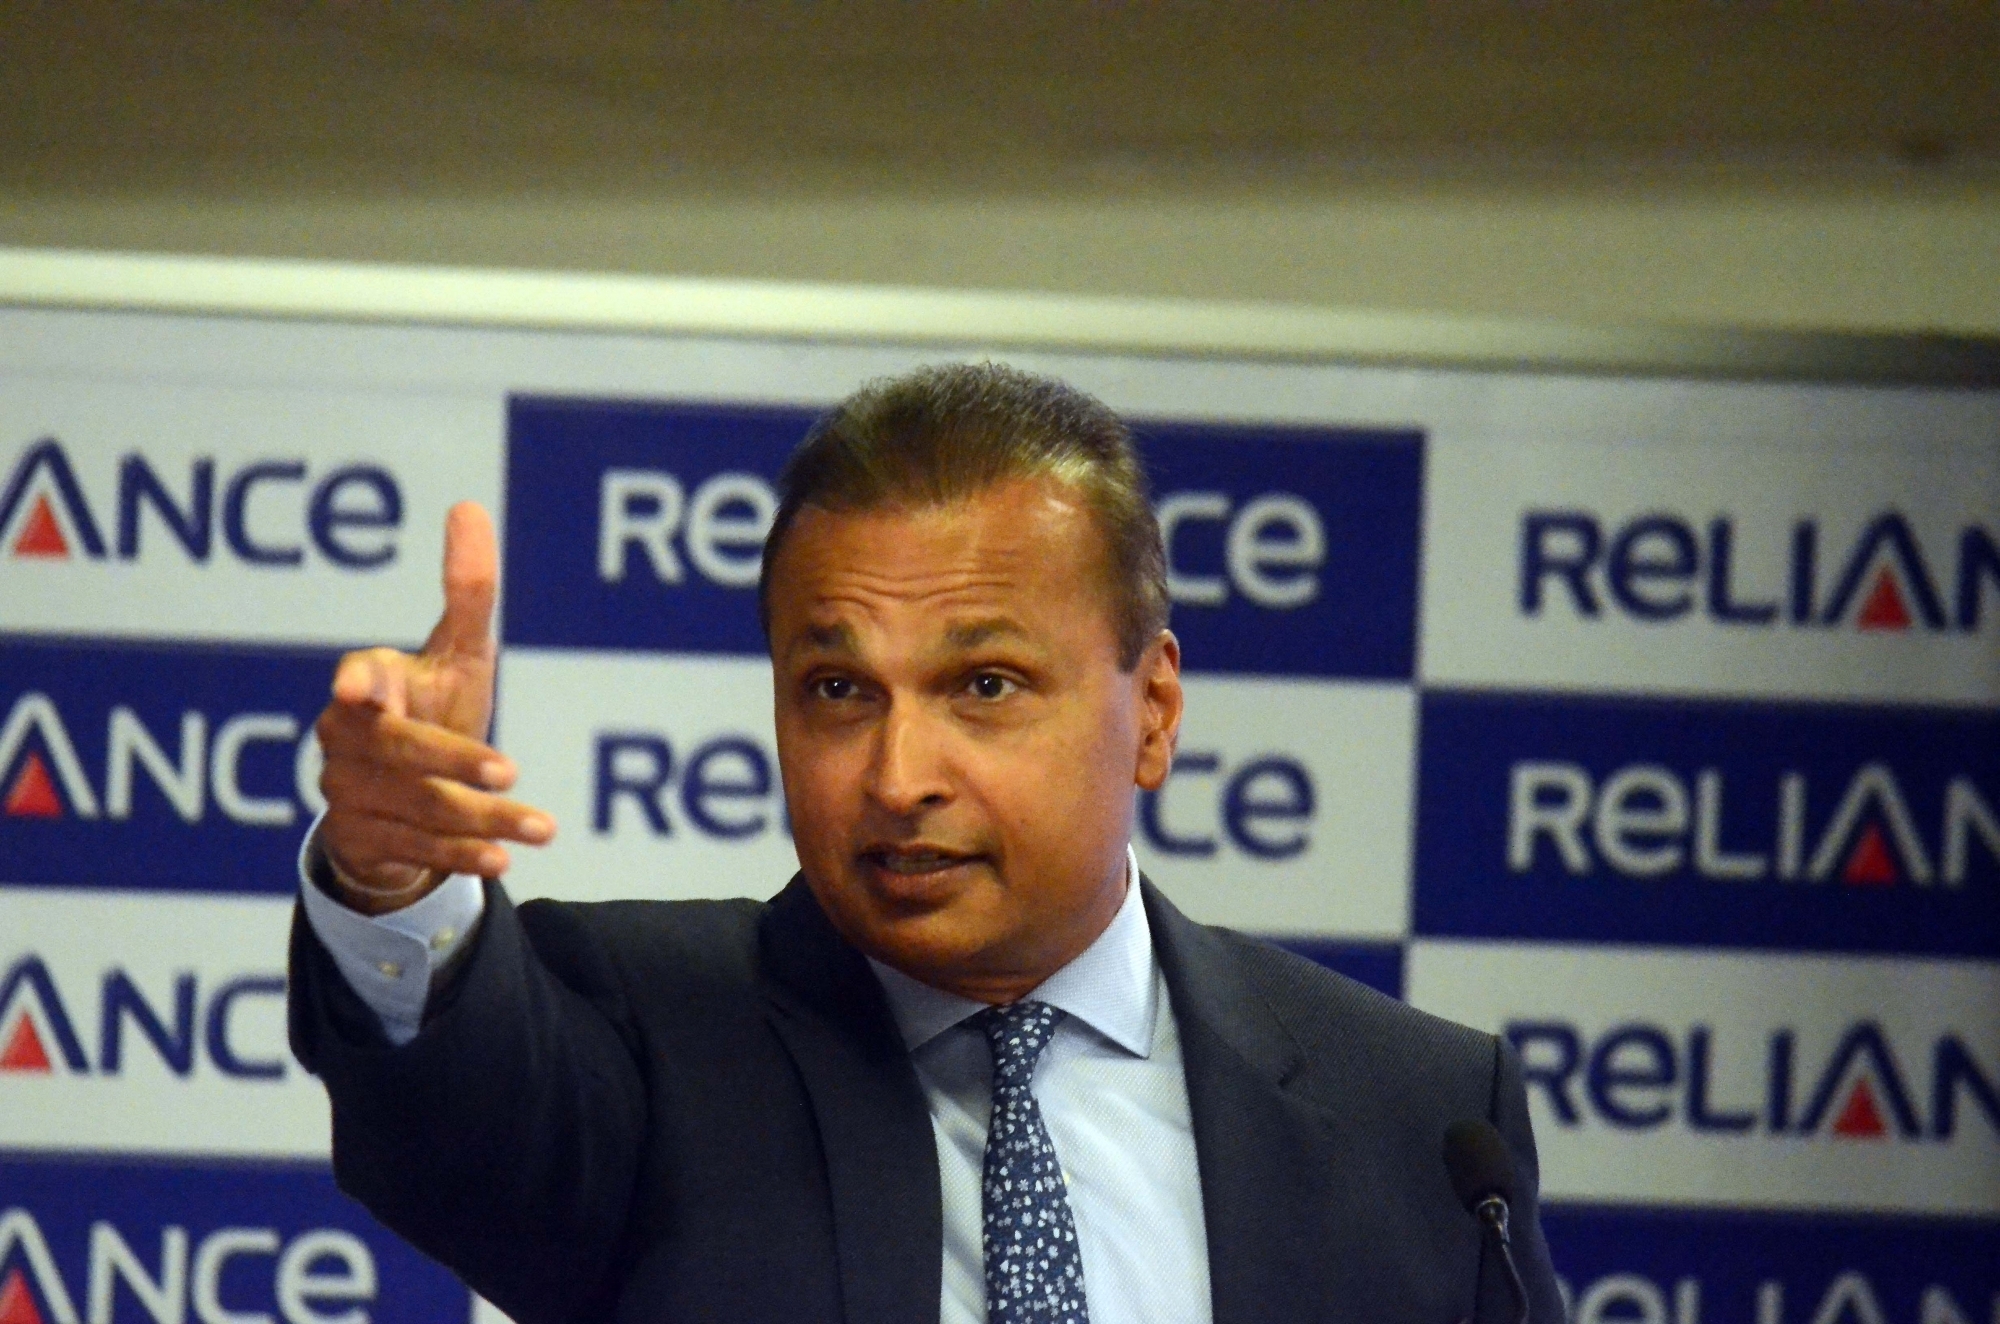 NCLAT reserves order on admission of contempt plea filed against Anil Ambani, other officials